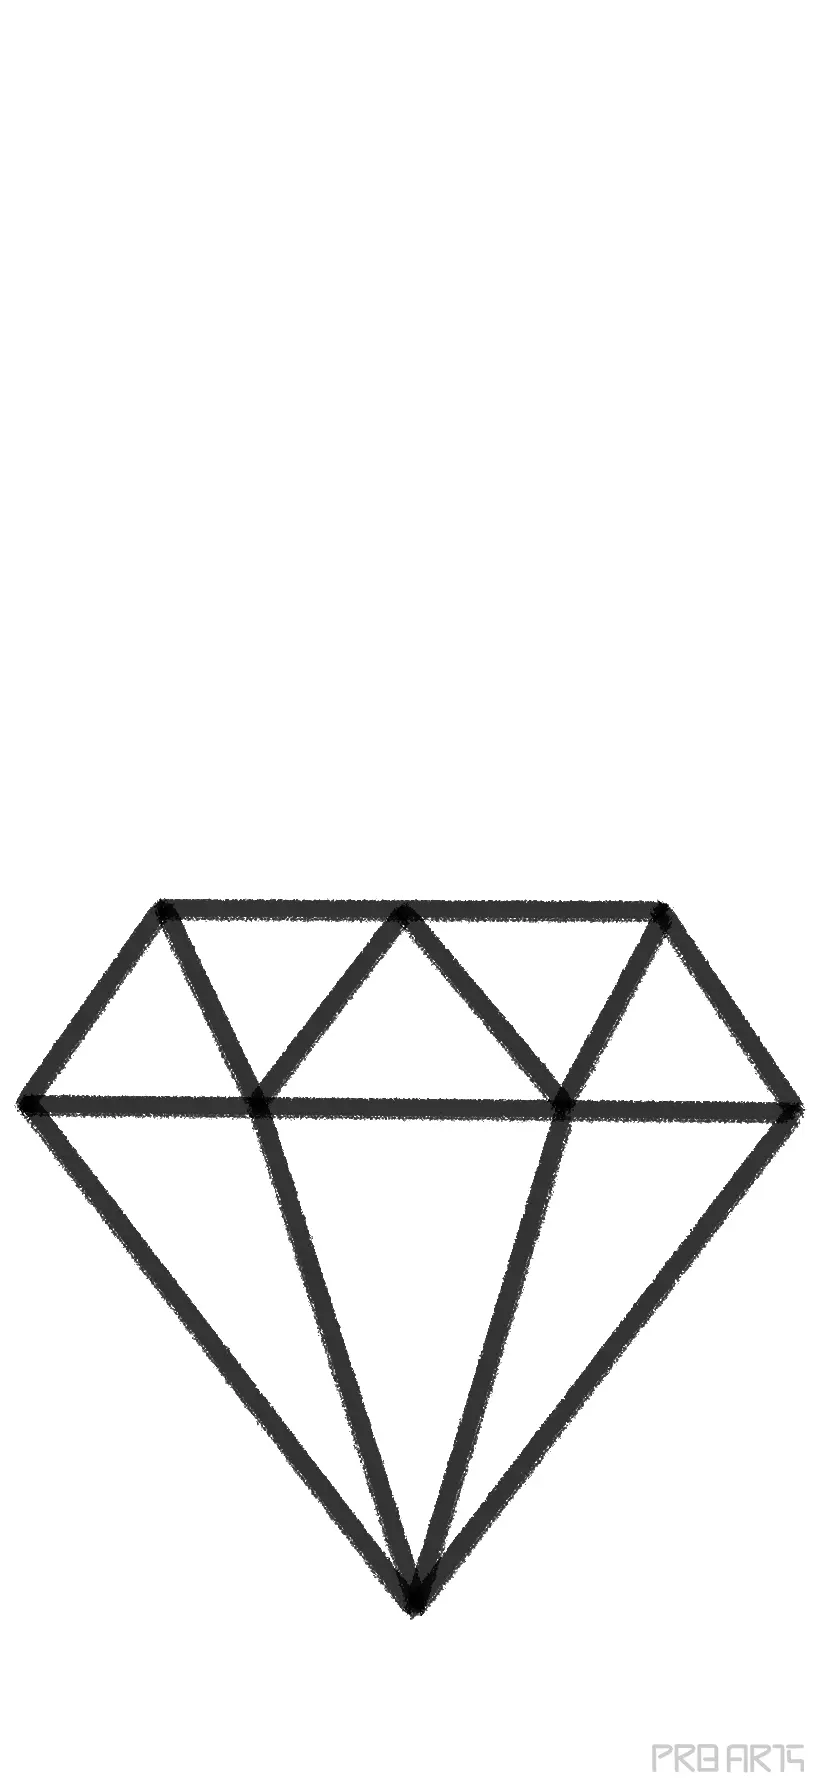 how to draw a diamond easy